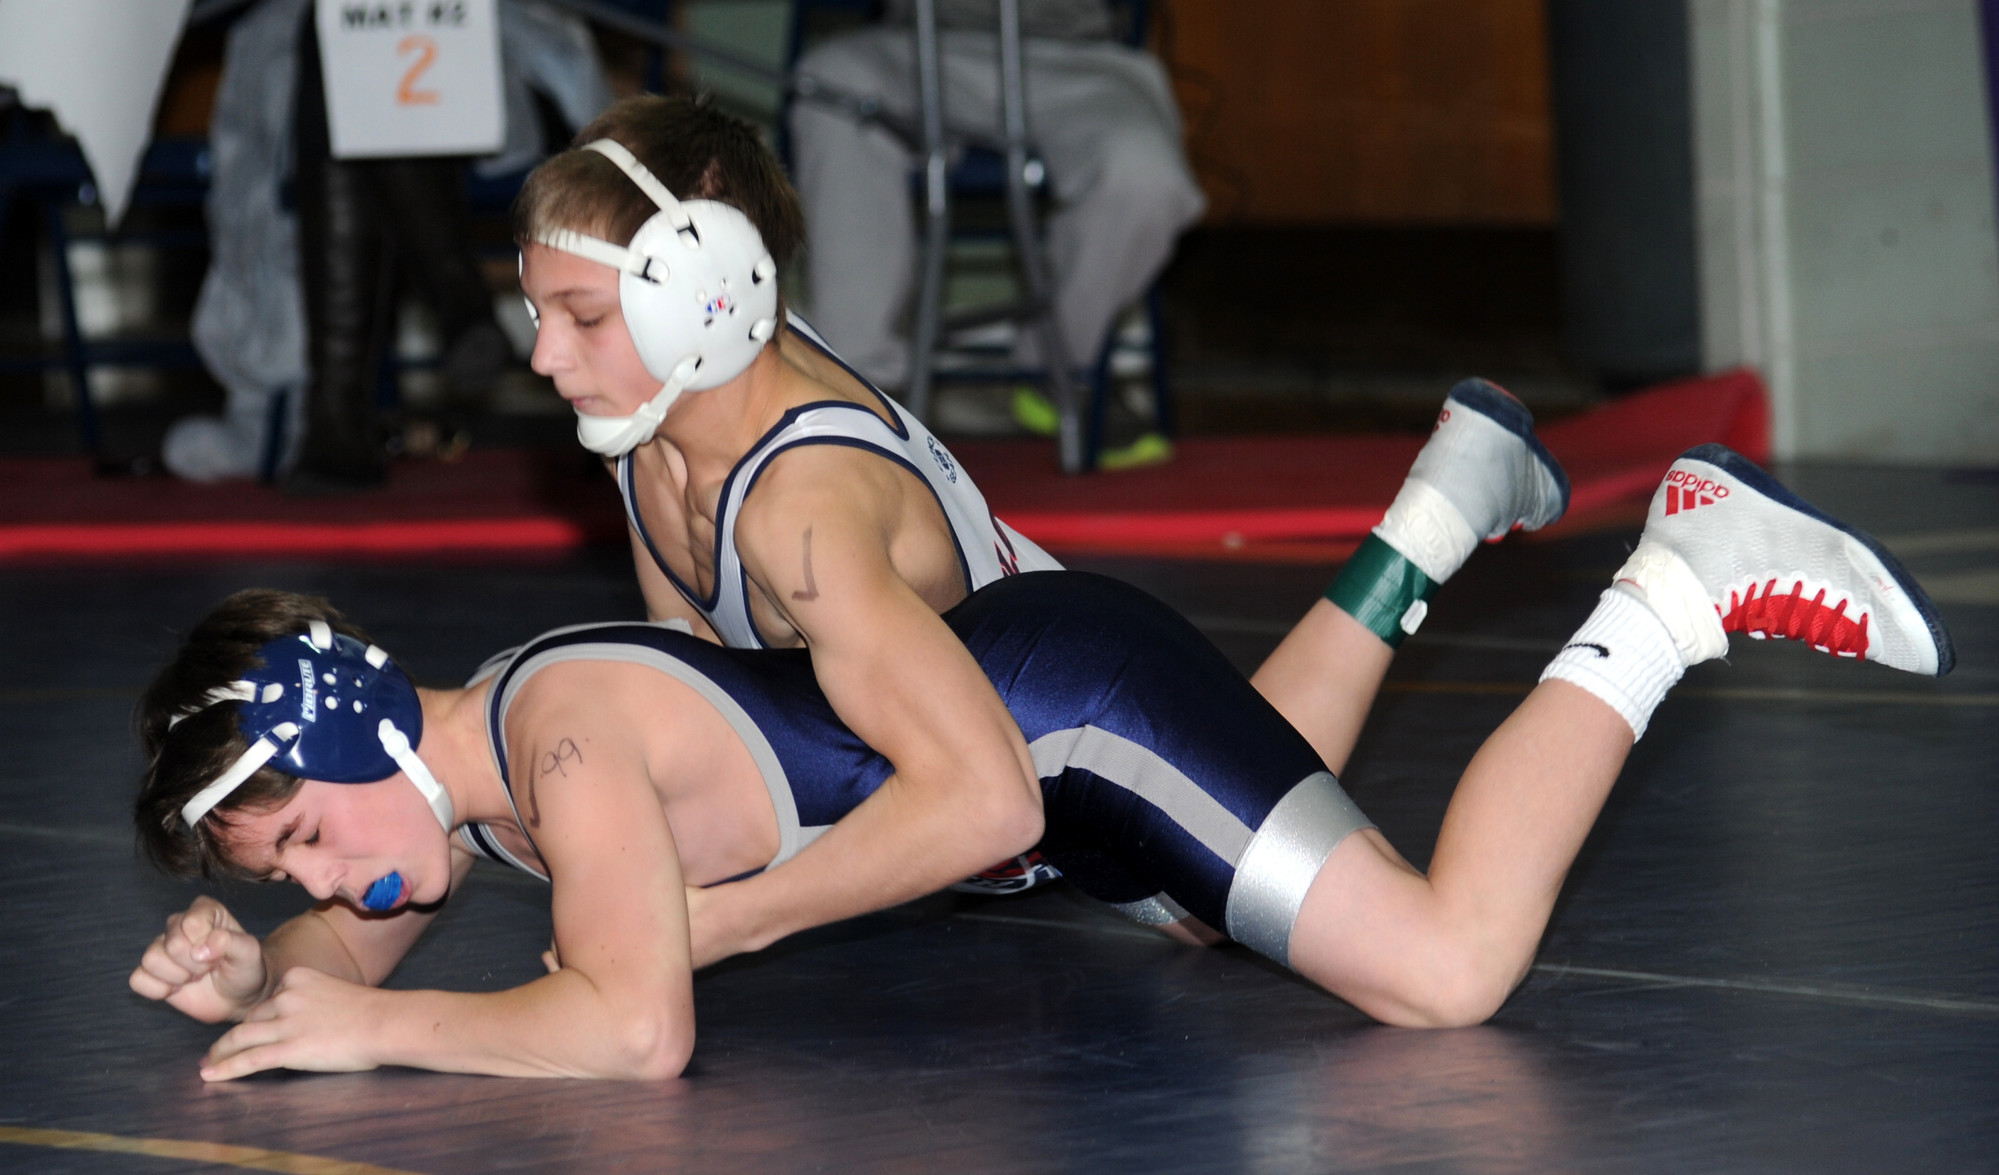 South Side’s Kyle Mosher, top, beat Hewlett’s Robbie Levitz on the way to winning the 99-pound title at the Nassau qualifier tournament hosted by Hewlett last Saturday.